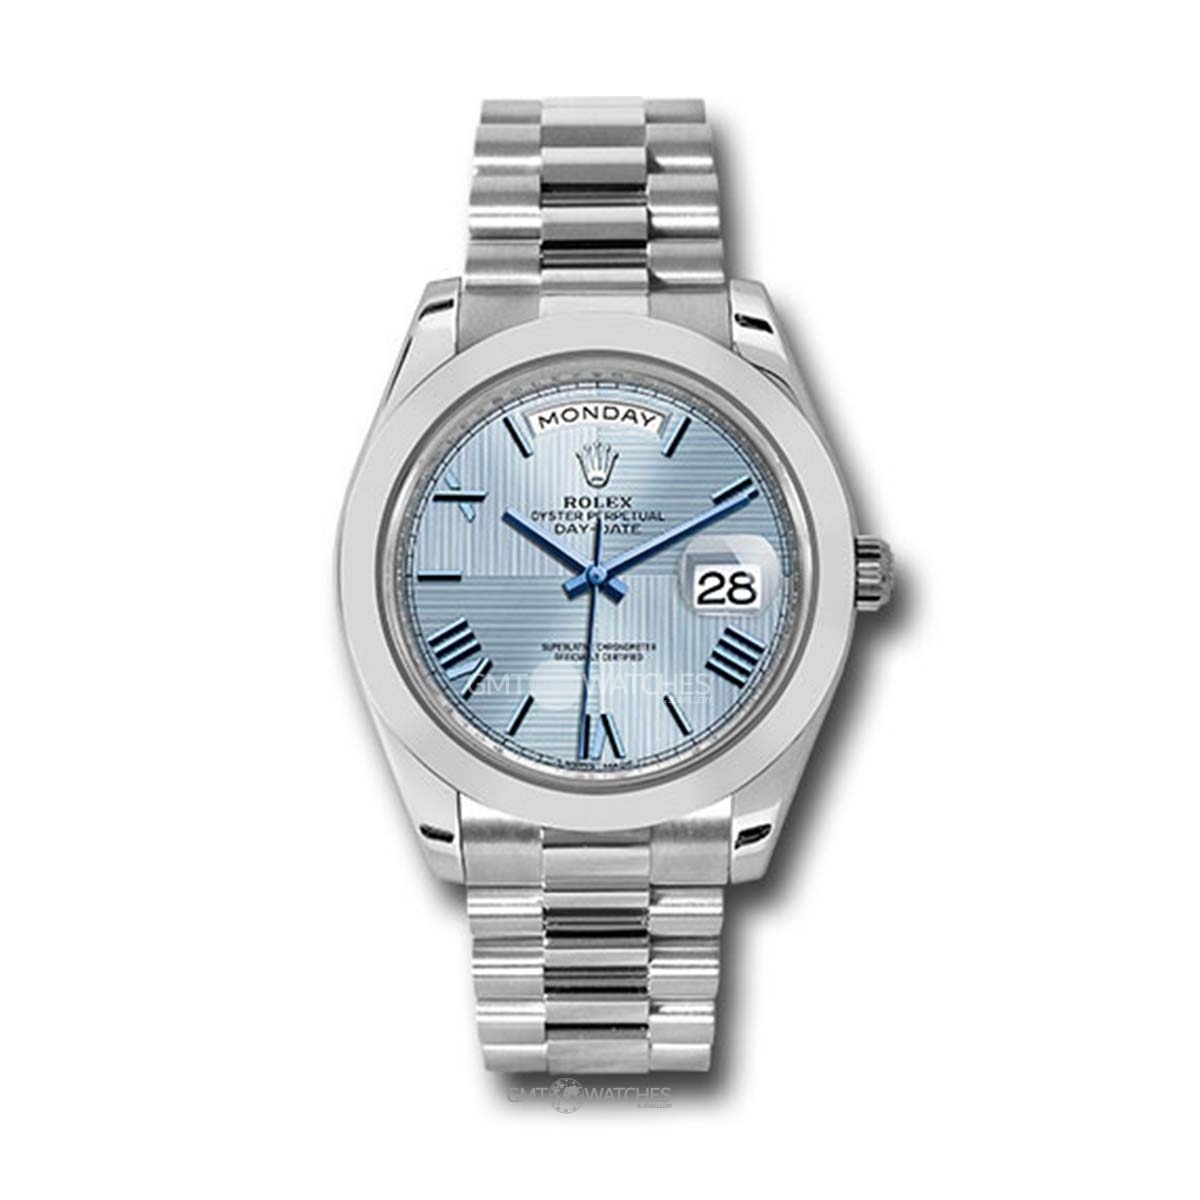 Rolex Oyster Perpetual Day-Date 40mm Platinum 228206 ibqmrp